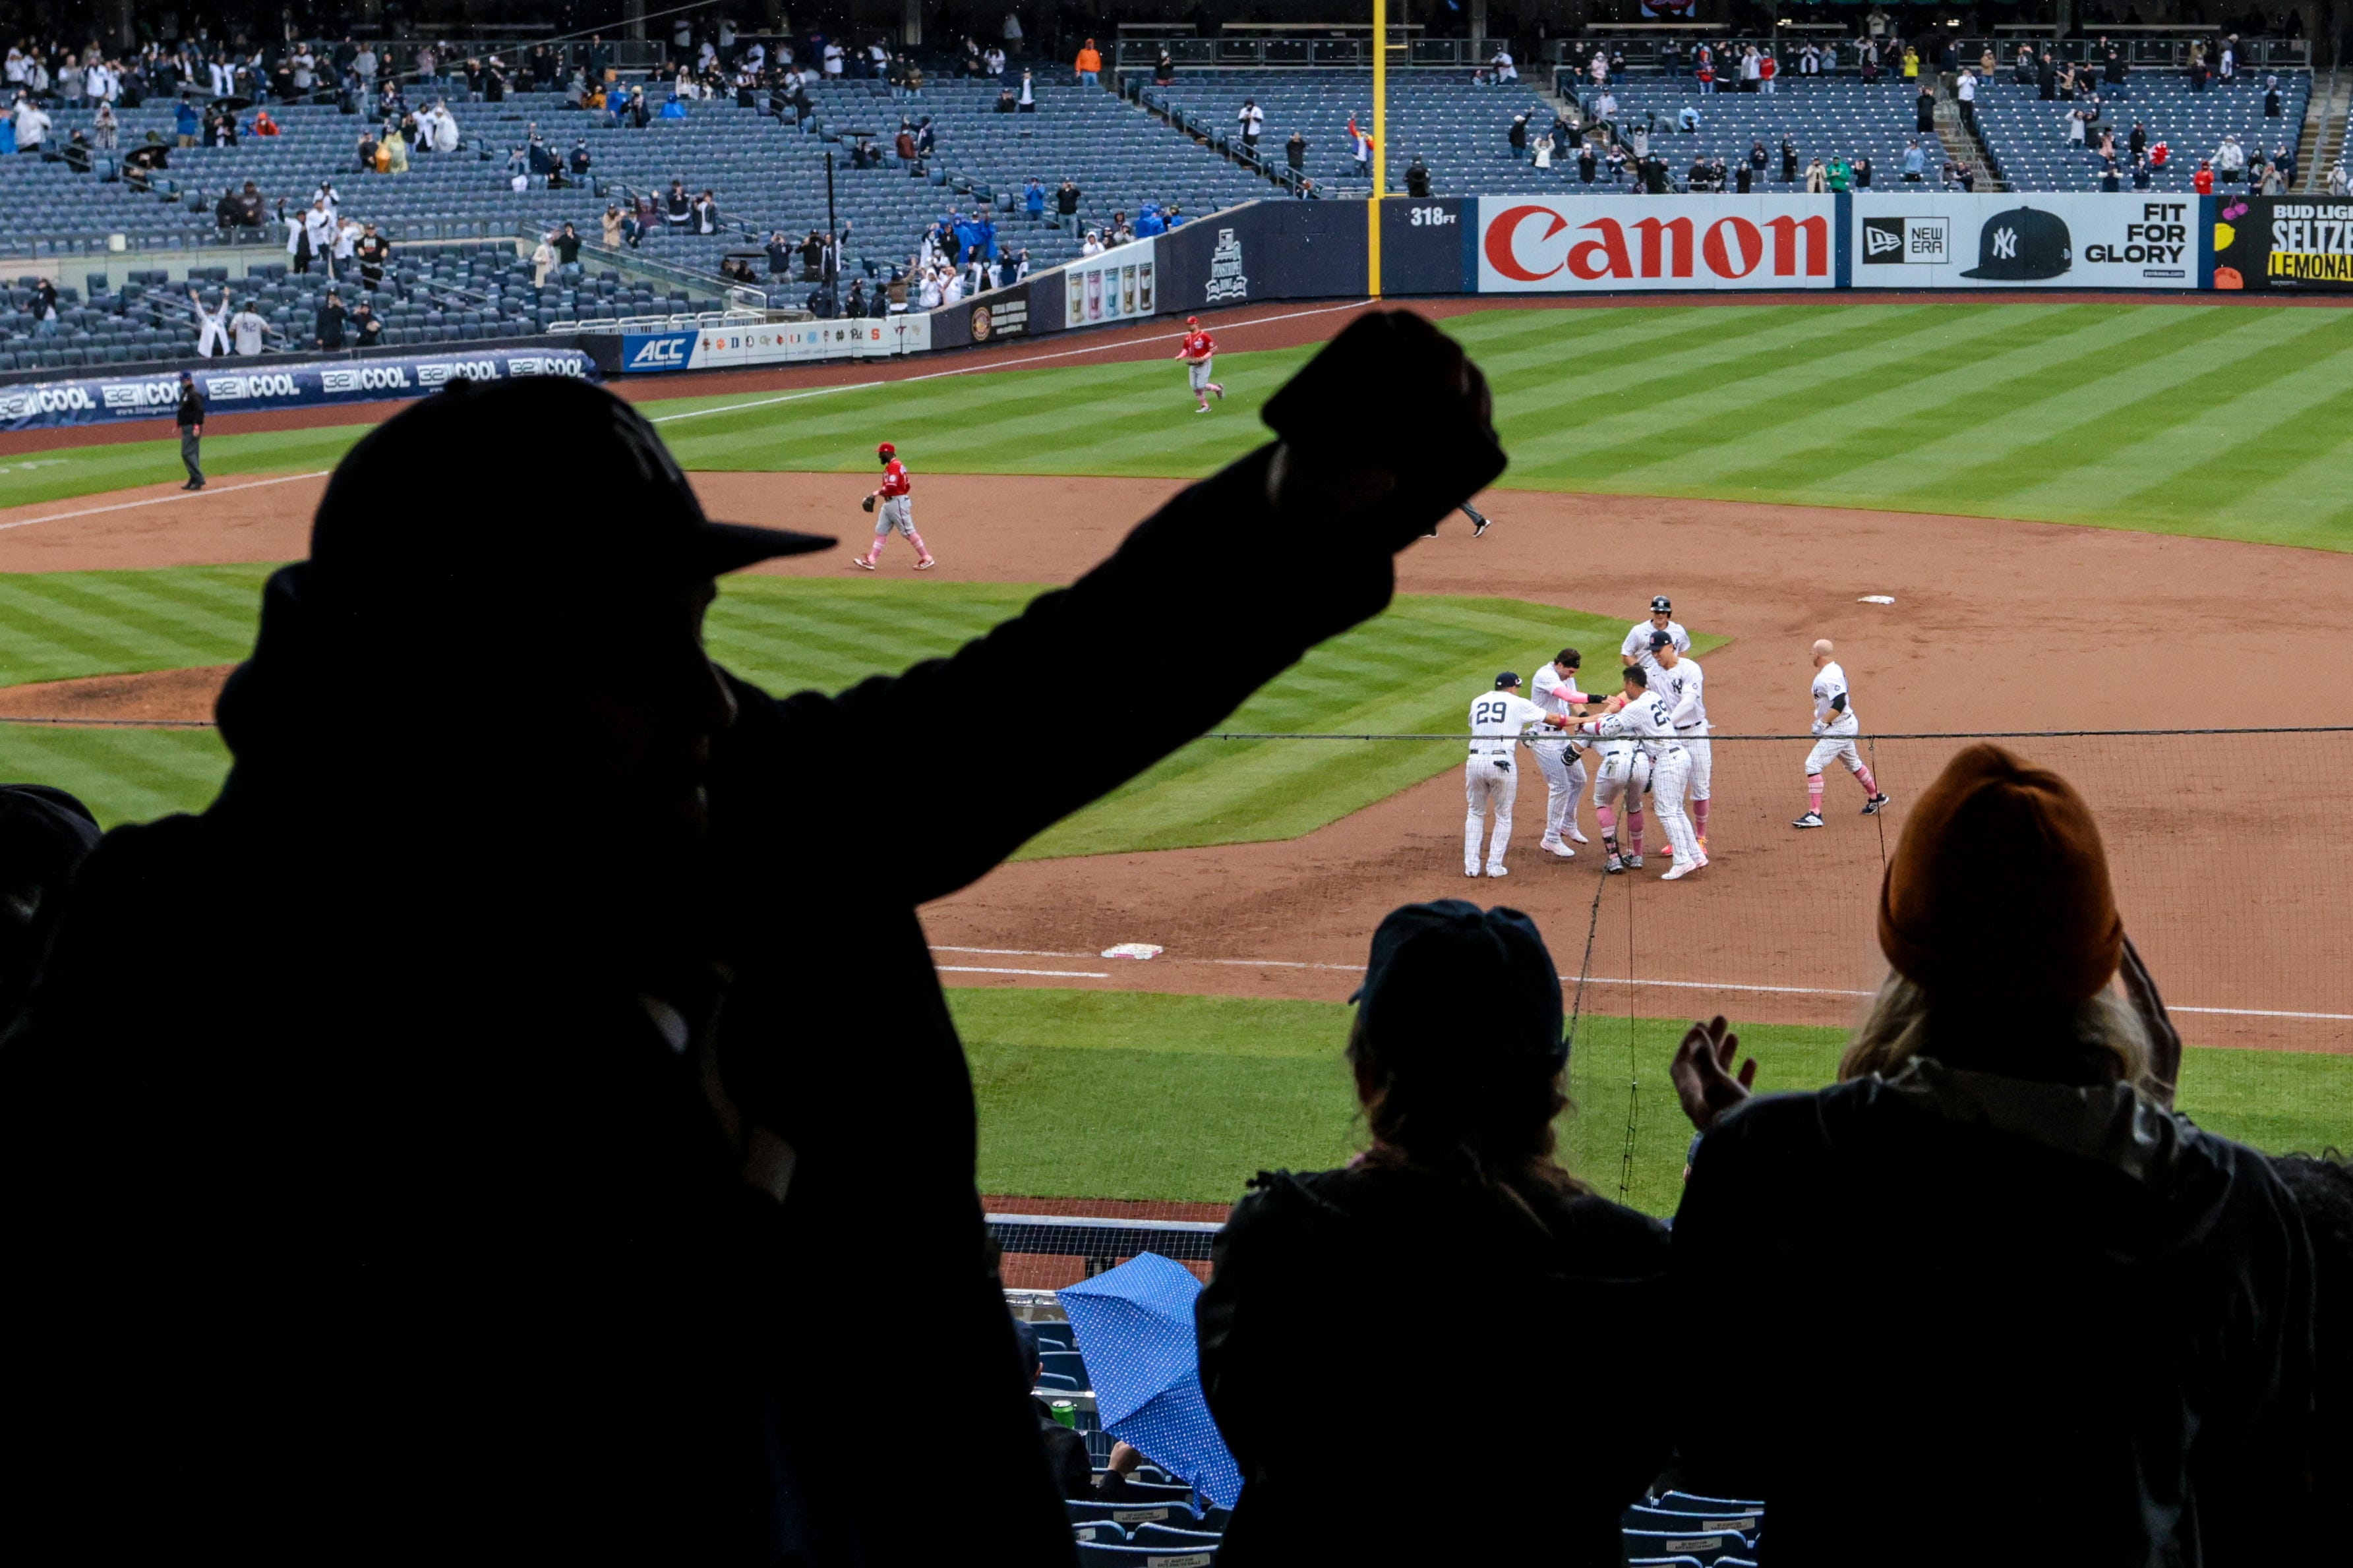 MLB teams plan to fully reopen stadiums soon — but are fans ready to come back?